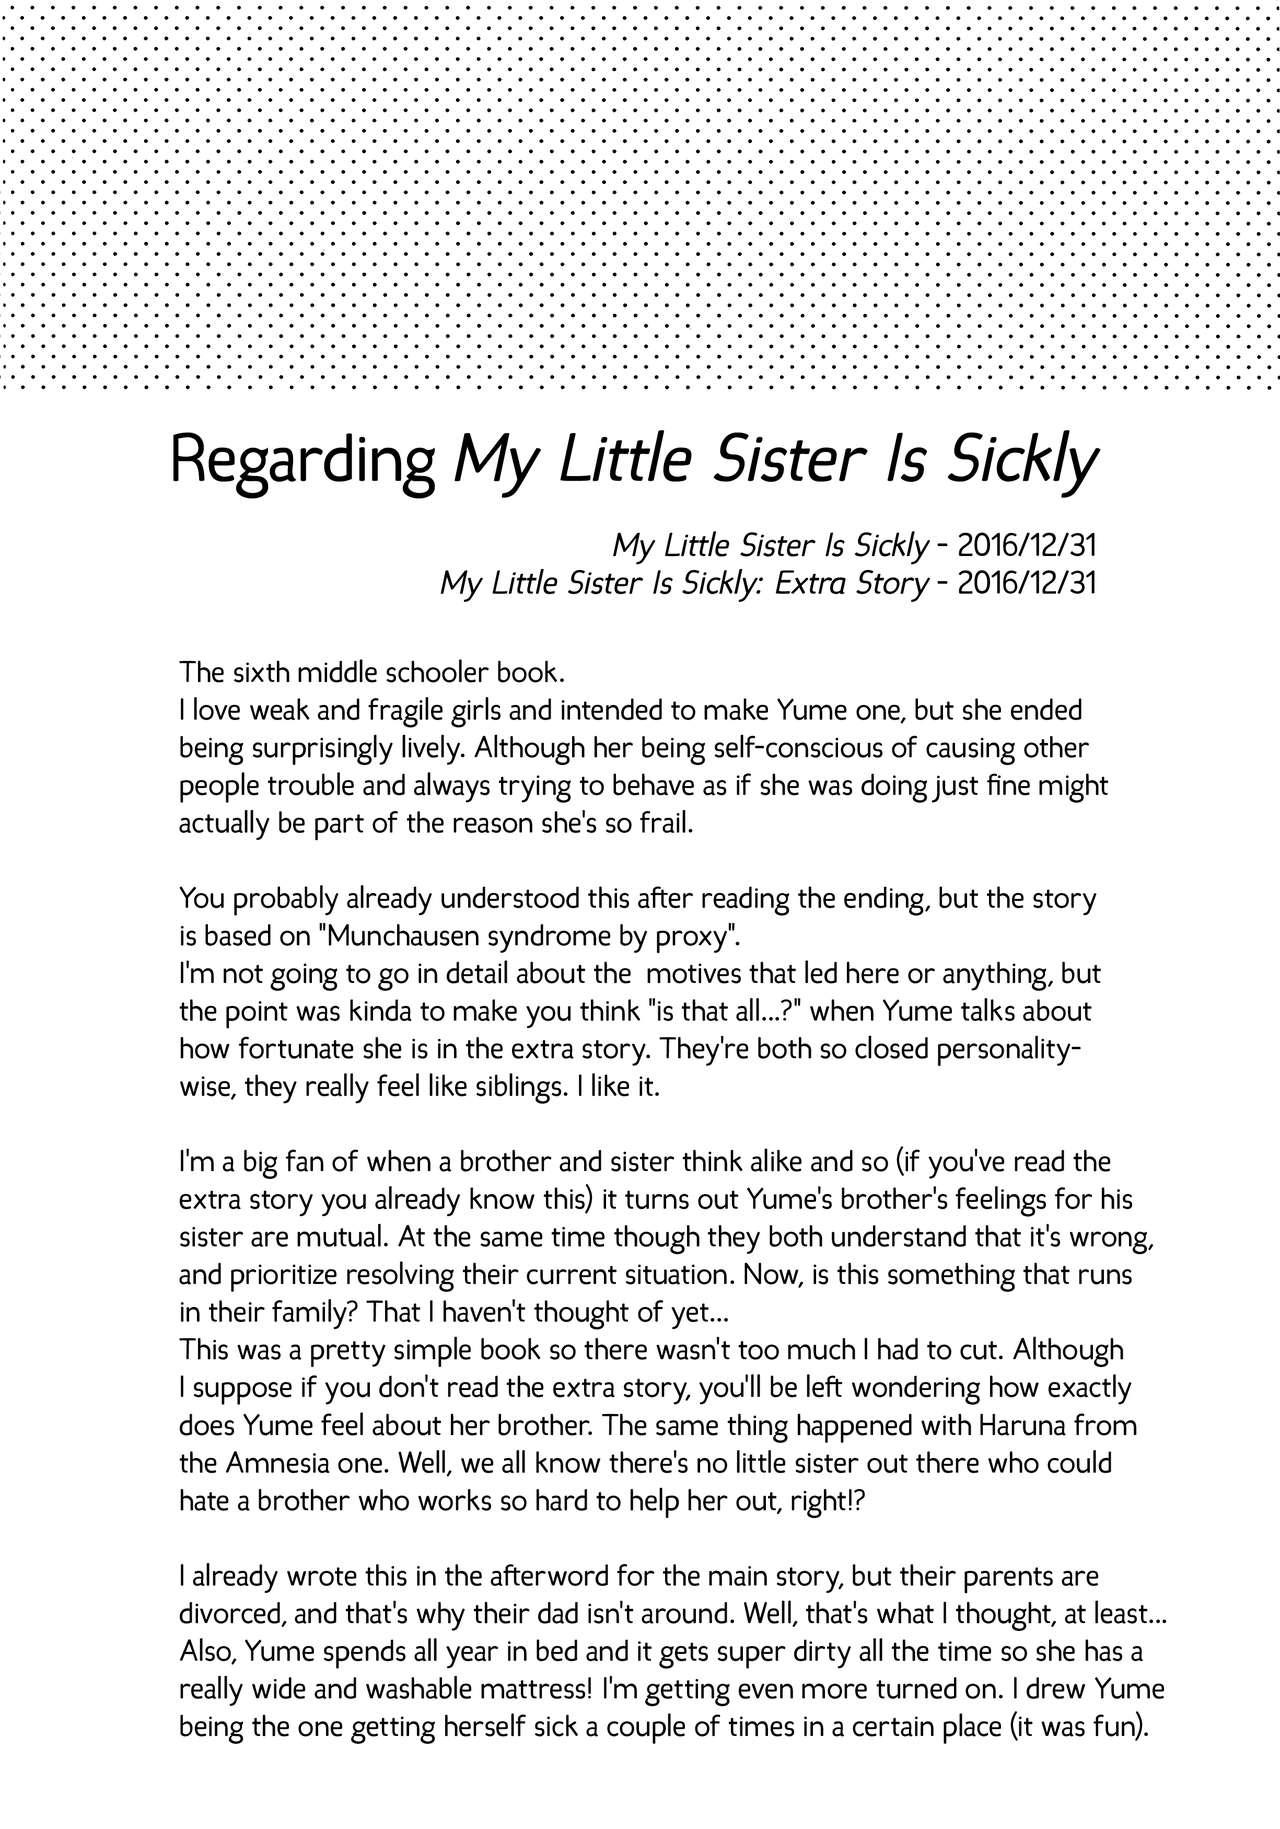 Amateur Porn Imouto wa Sickness no Omake | My Little Sister is Sickly: Extra Story Porno Amateur - Page 10